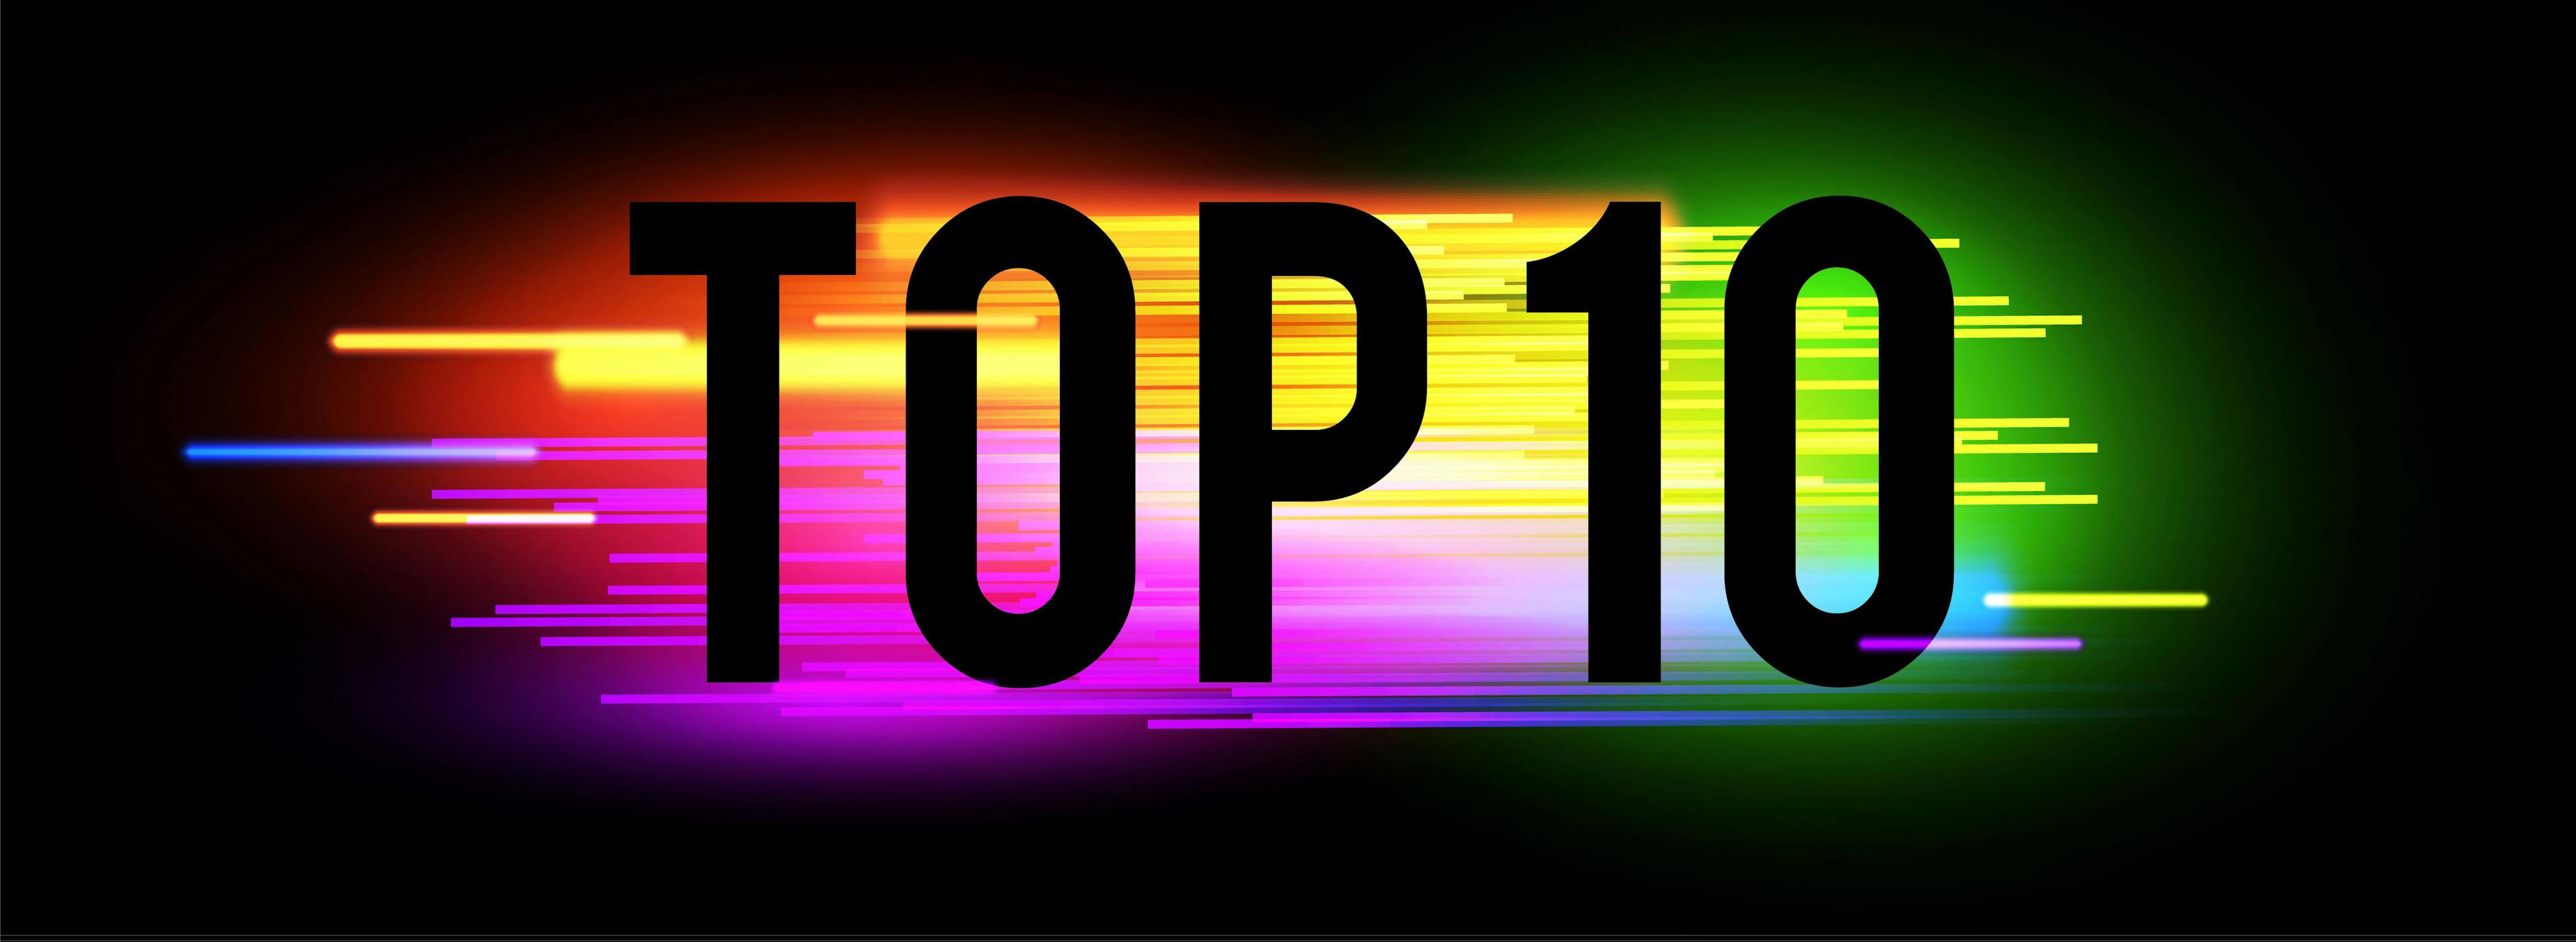 top 10 articles by ICT for 2022